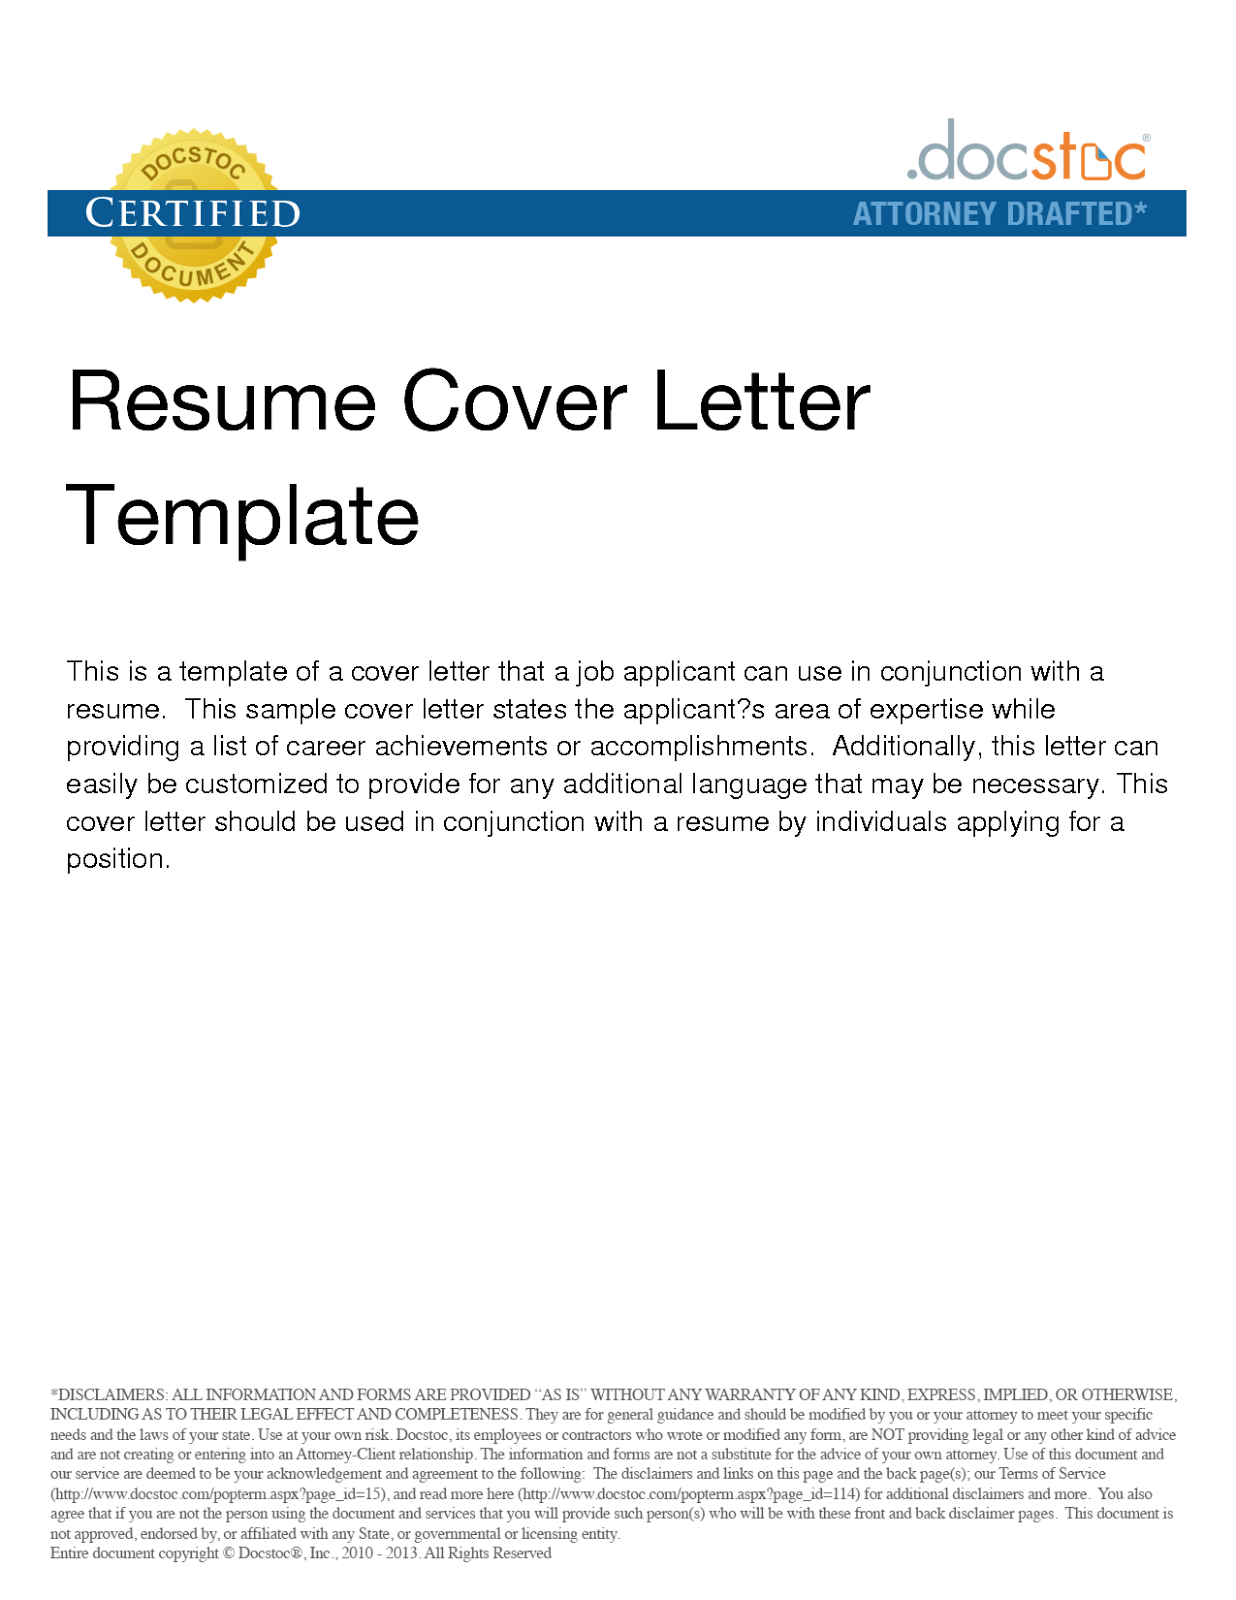 Outstanding resume cover letters